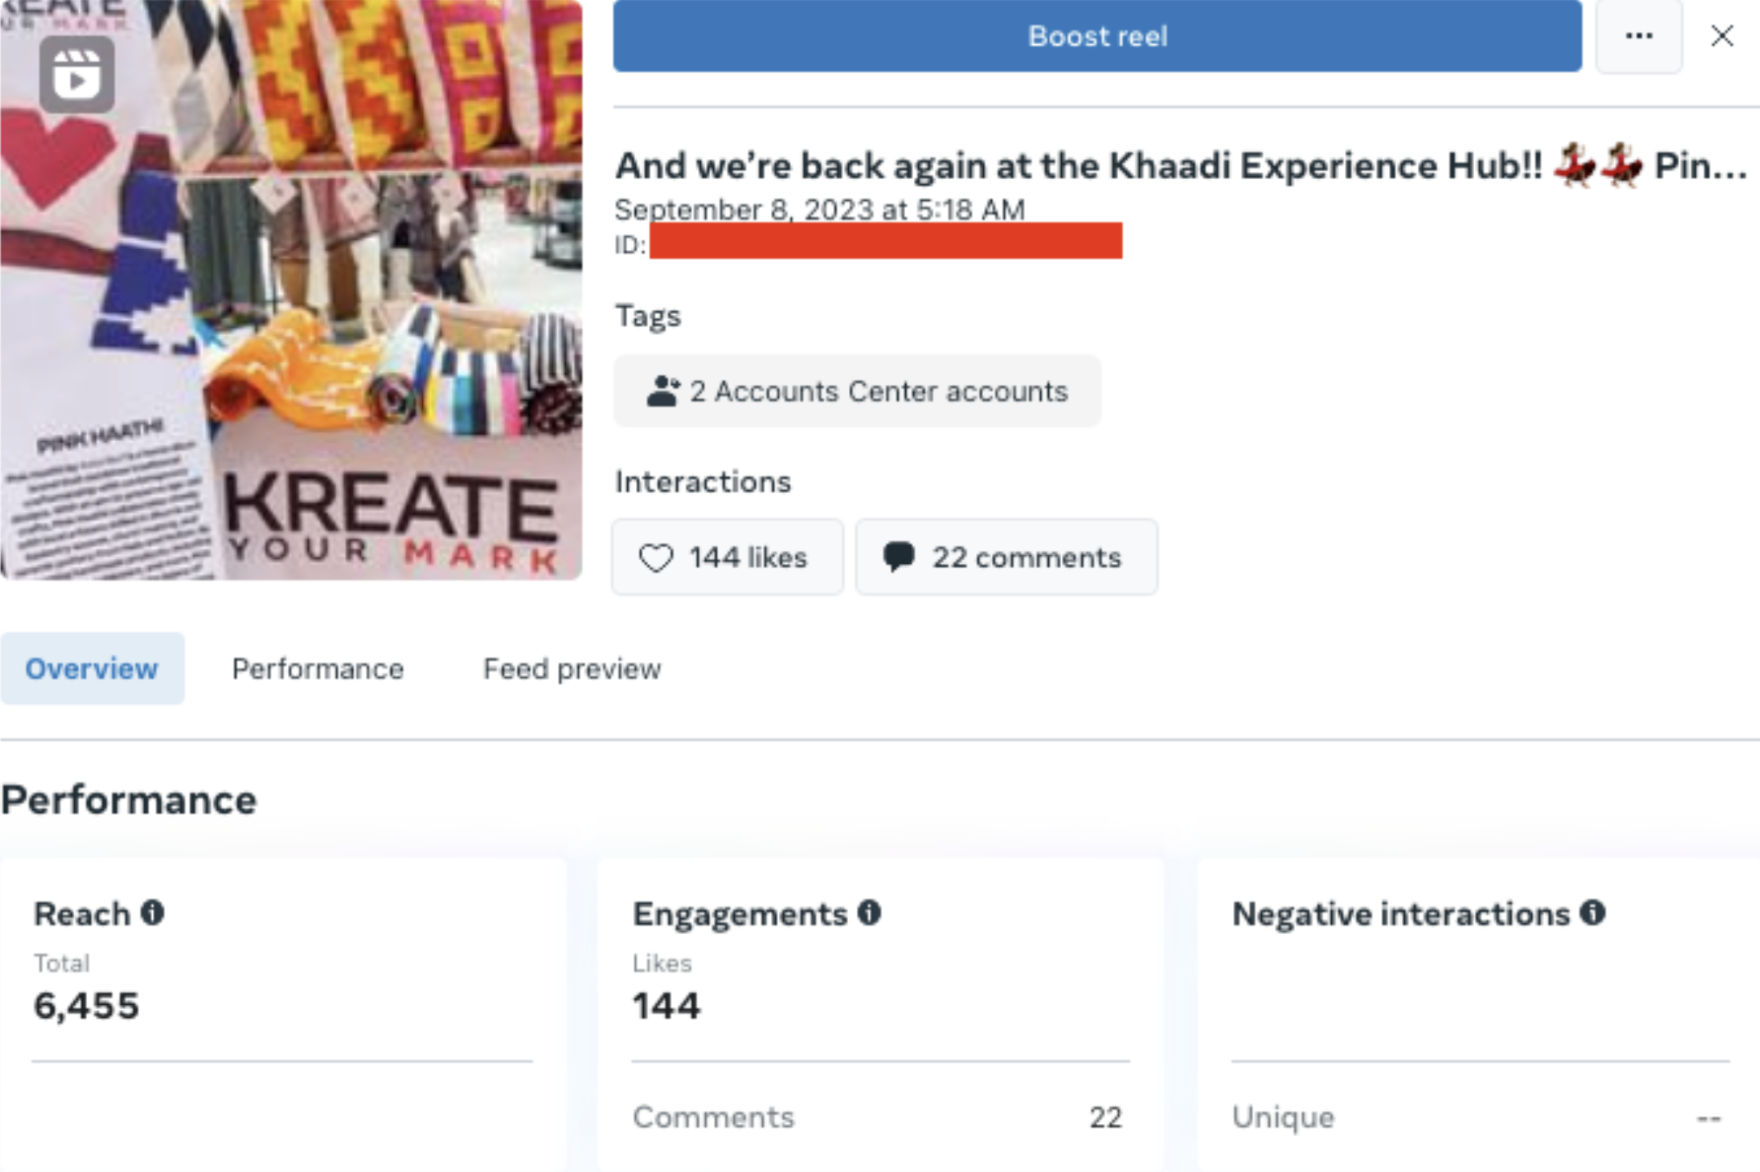 Preview of post insights in Creator Studio. The image shows the insights of a reel with information such as reach, engagements, likes and comments.